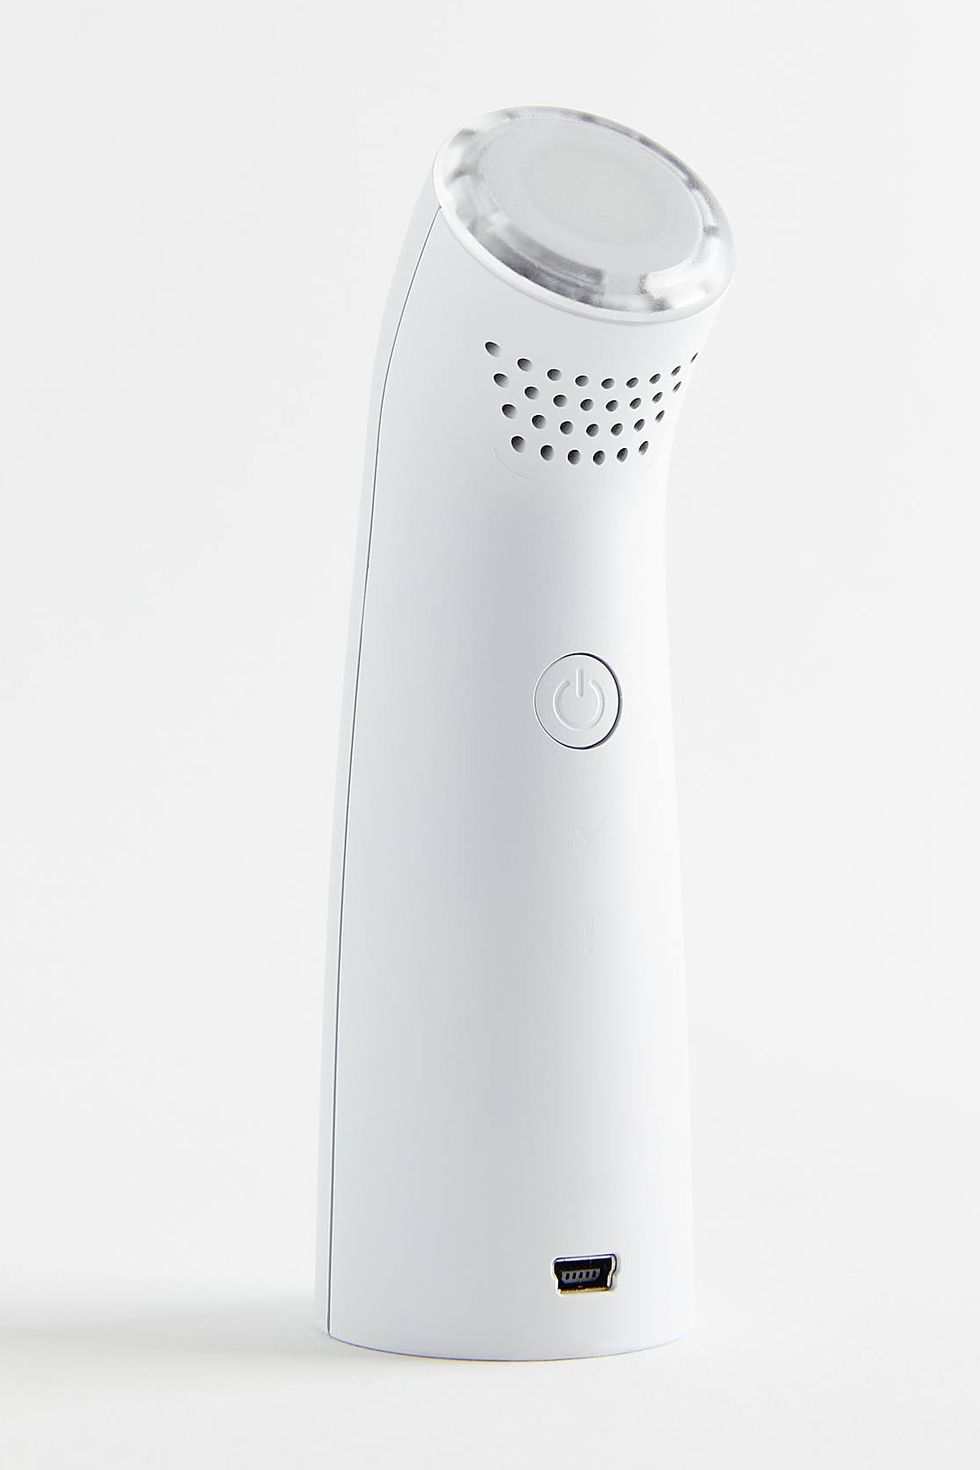 Tria Beauty Positively Clear Acne Clearing Device